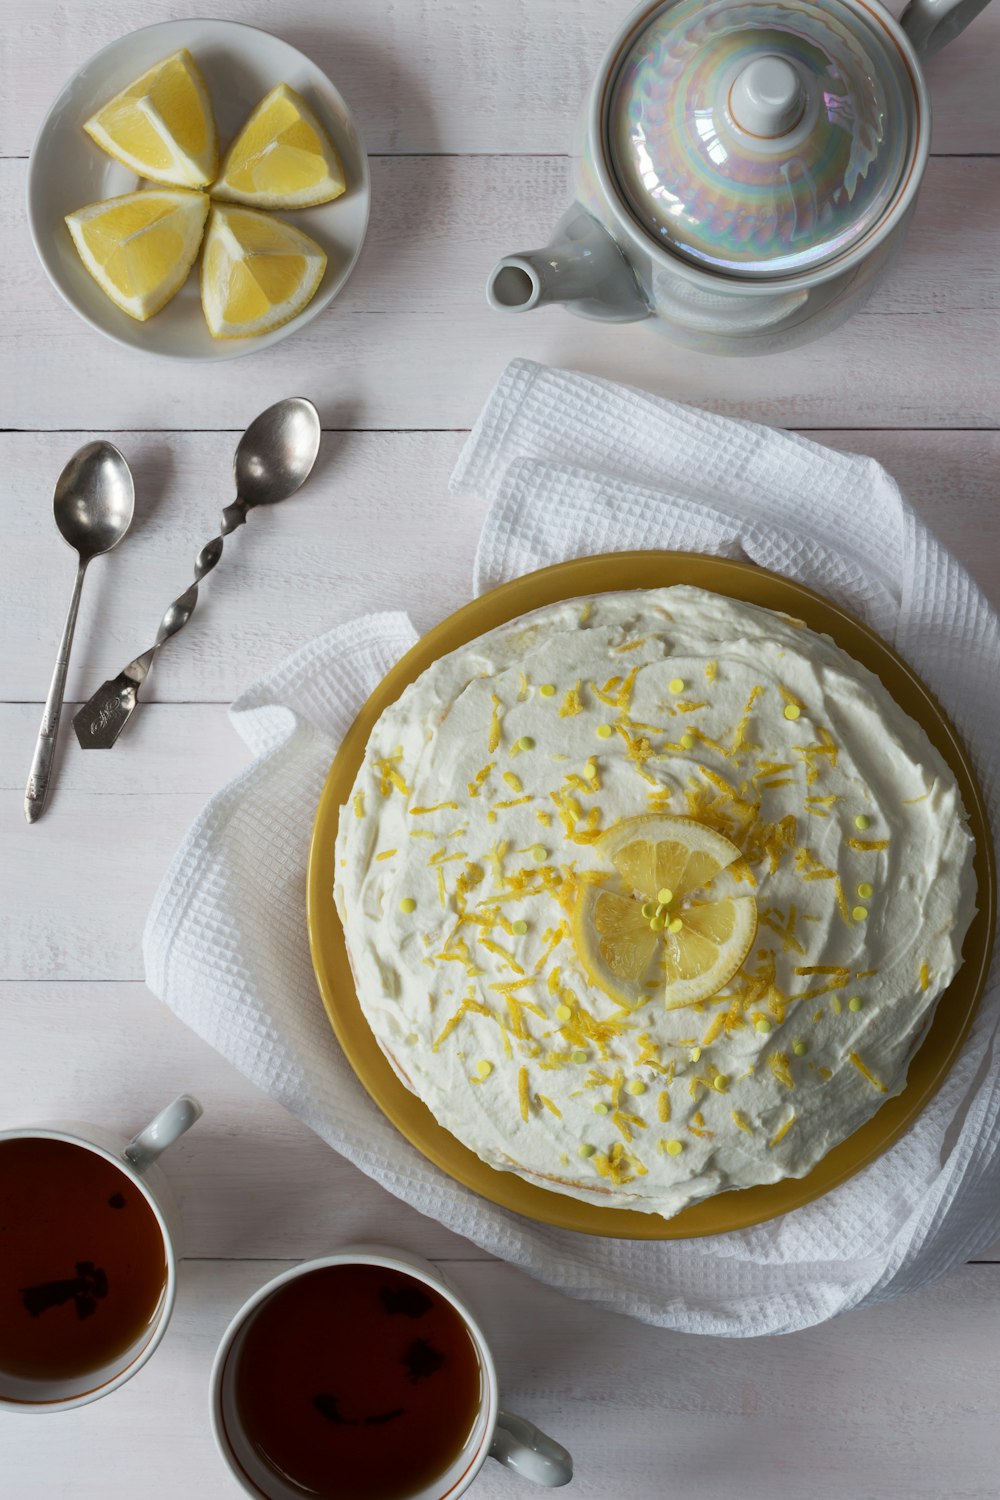 a cake on a plate with lemons and a cup of tea